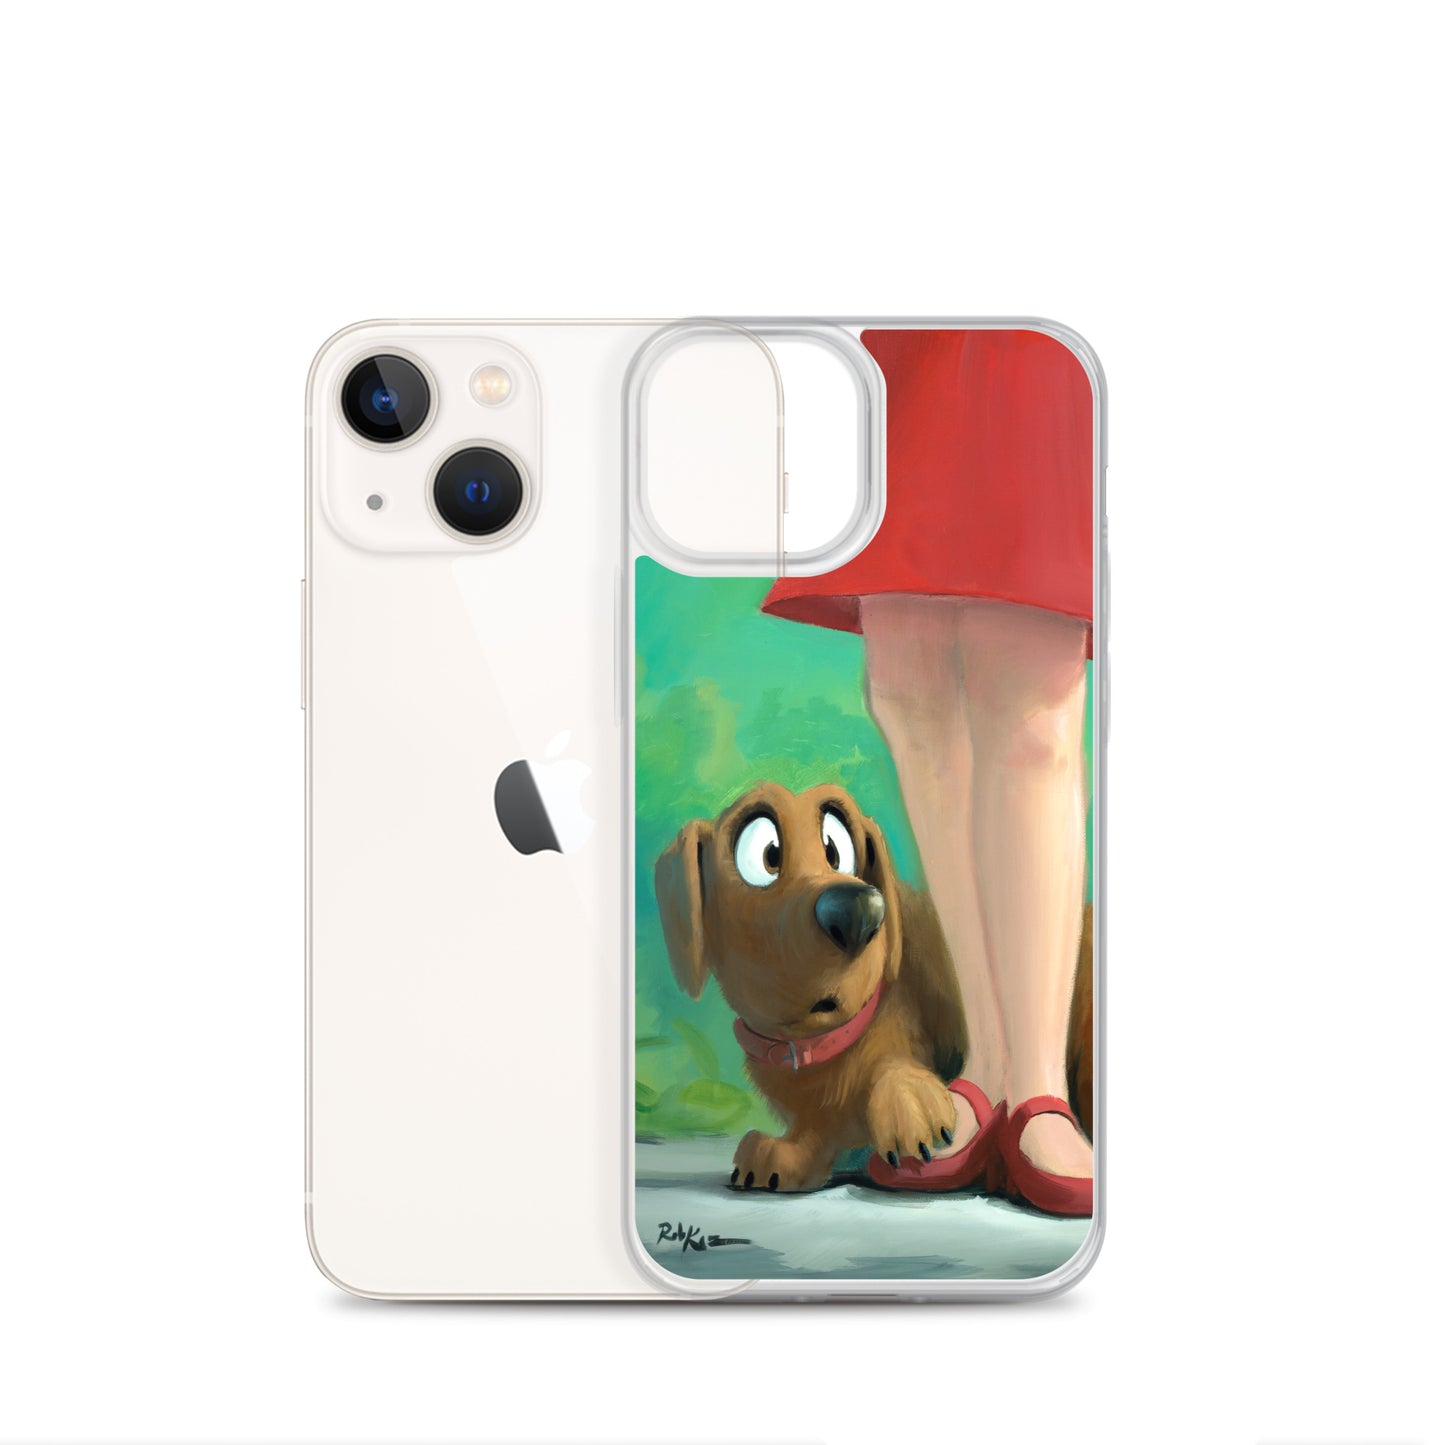 iPhone case featuring Brave Little Boy by Rob Kaz